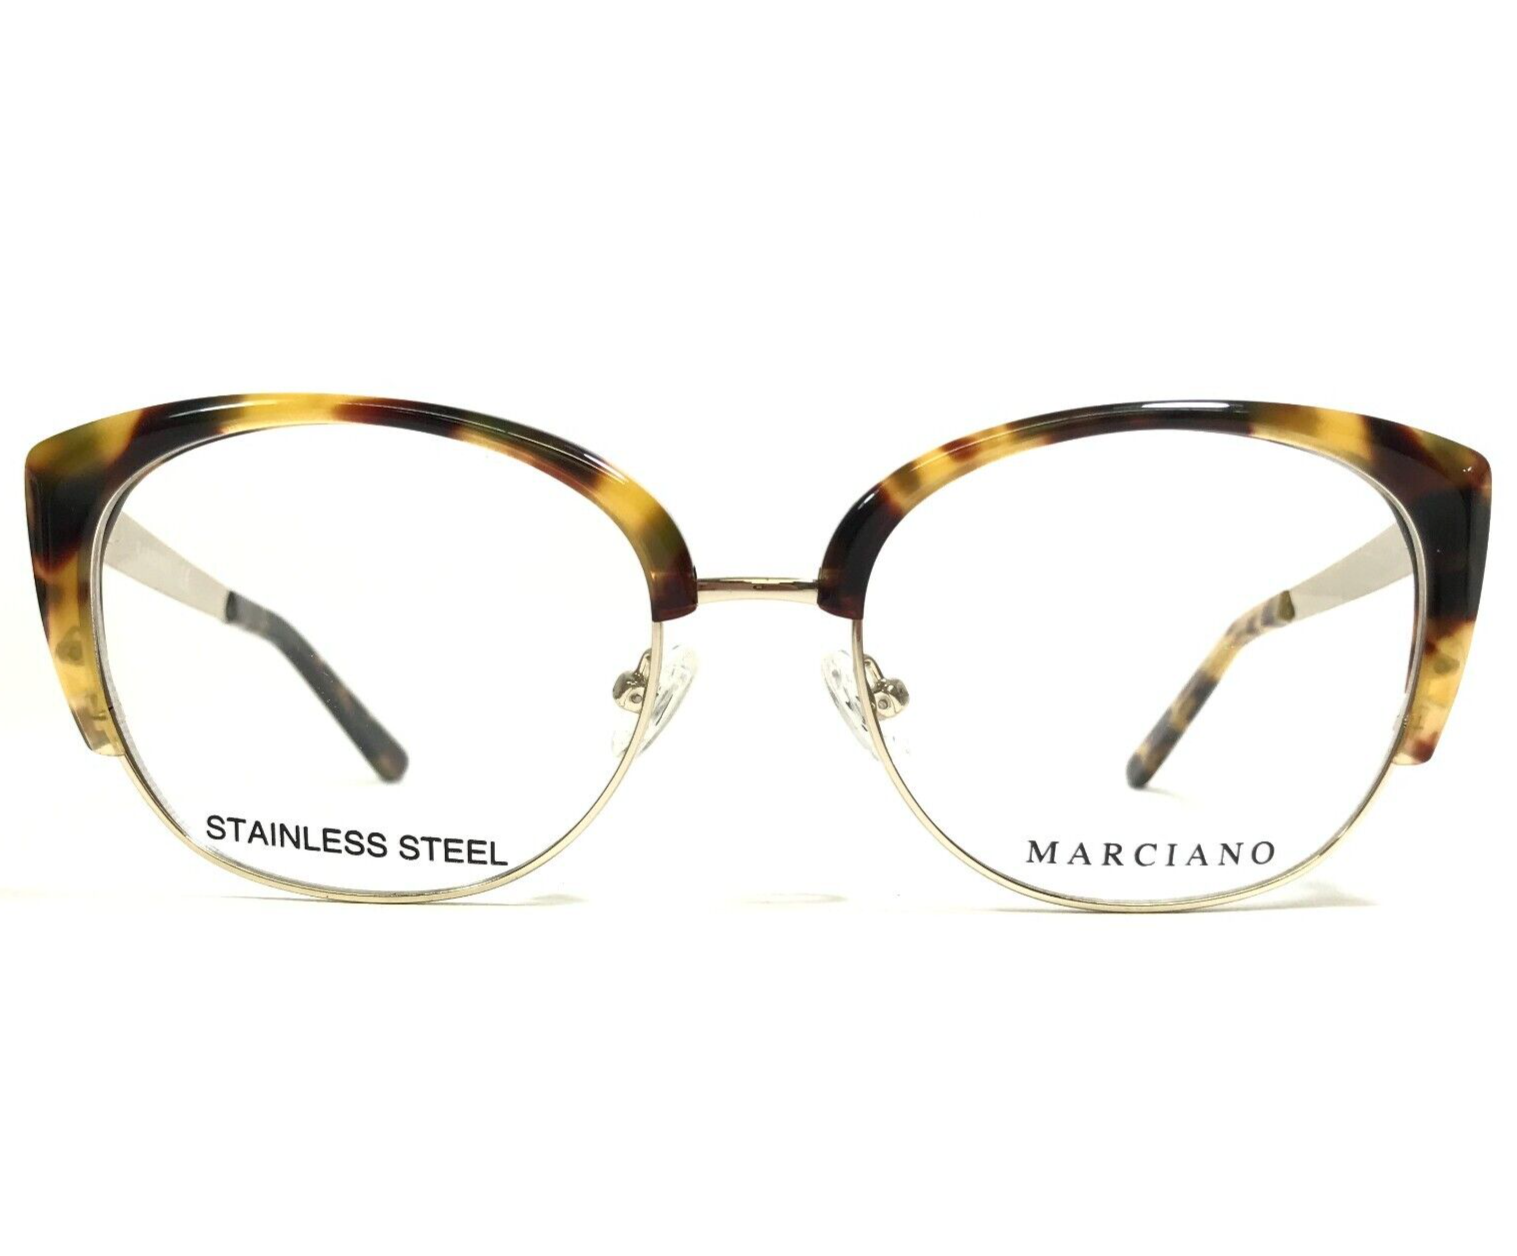 GUESS by Marciano Eyeglasses Frames GM0334 053 Tortoise Gold Cat Eye 52-18-140 - $79.45